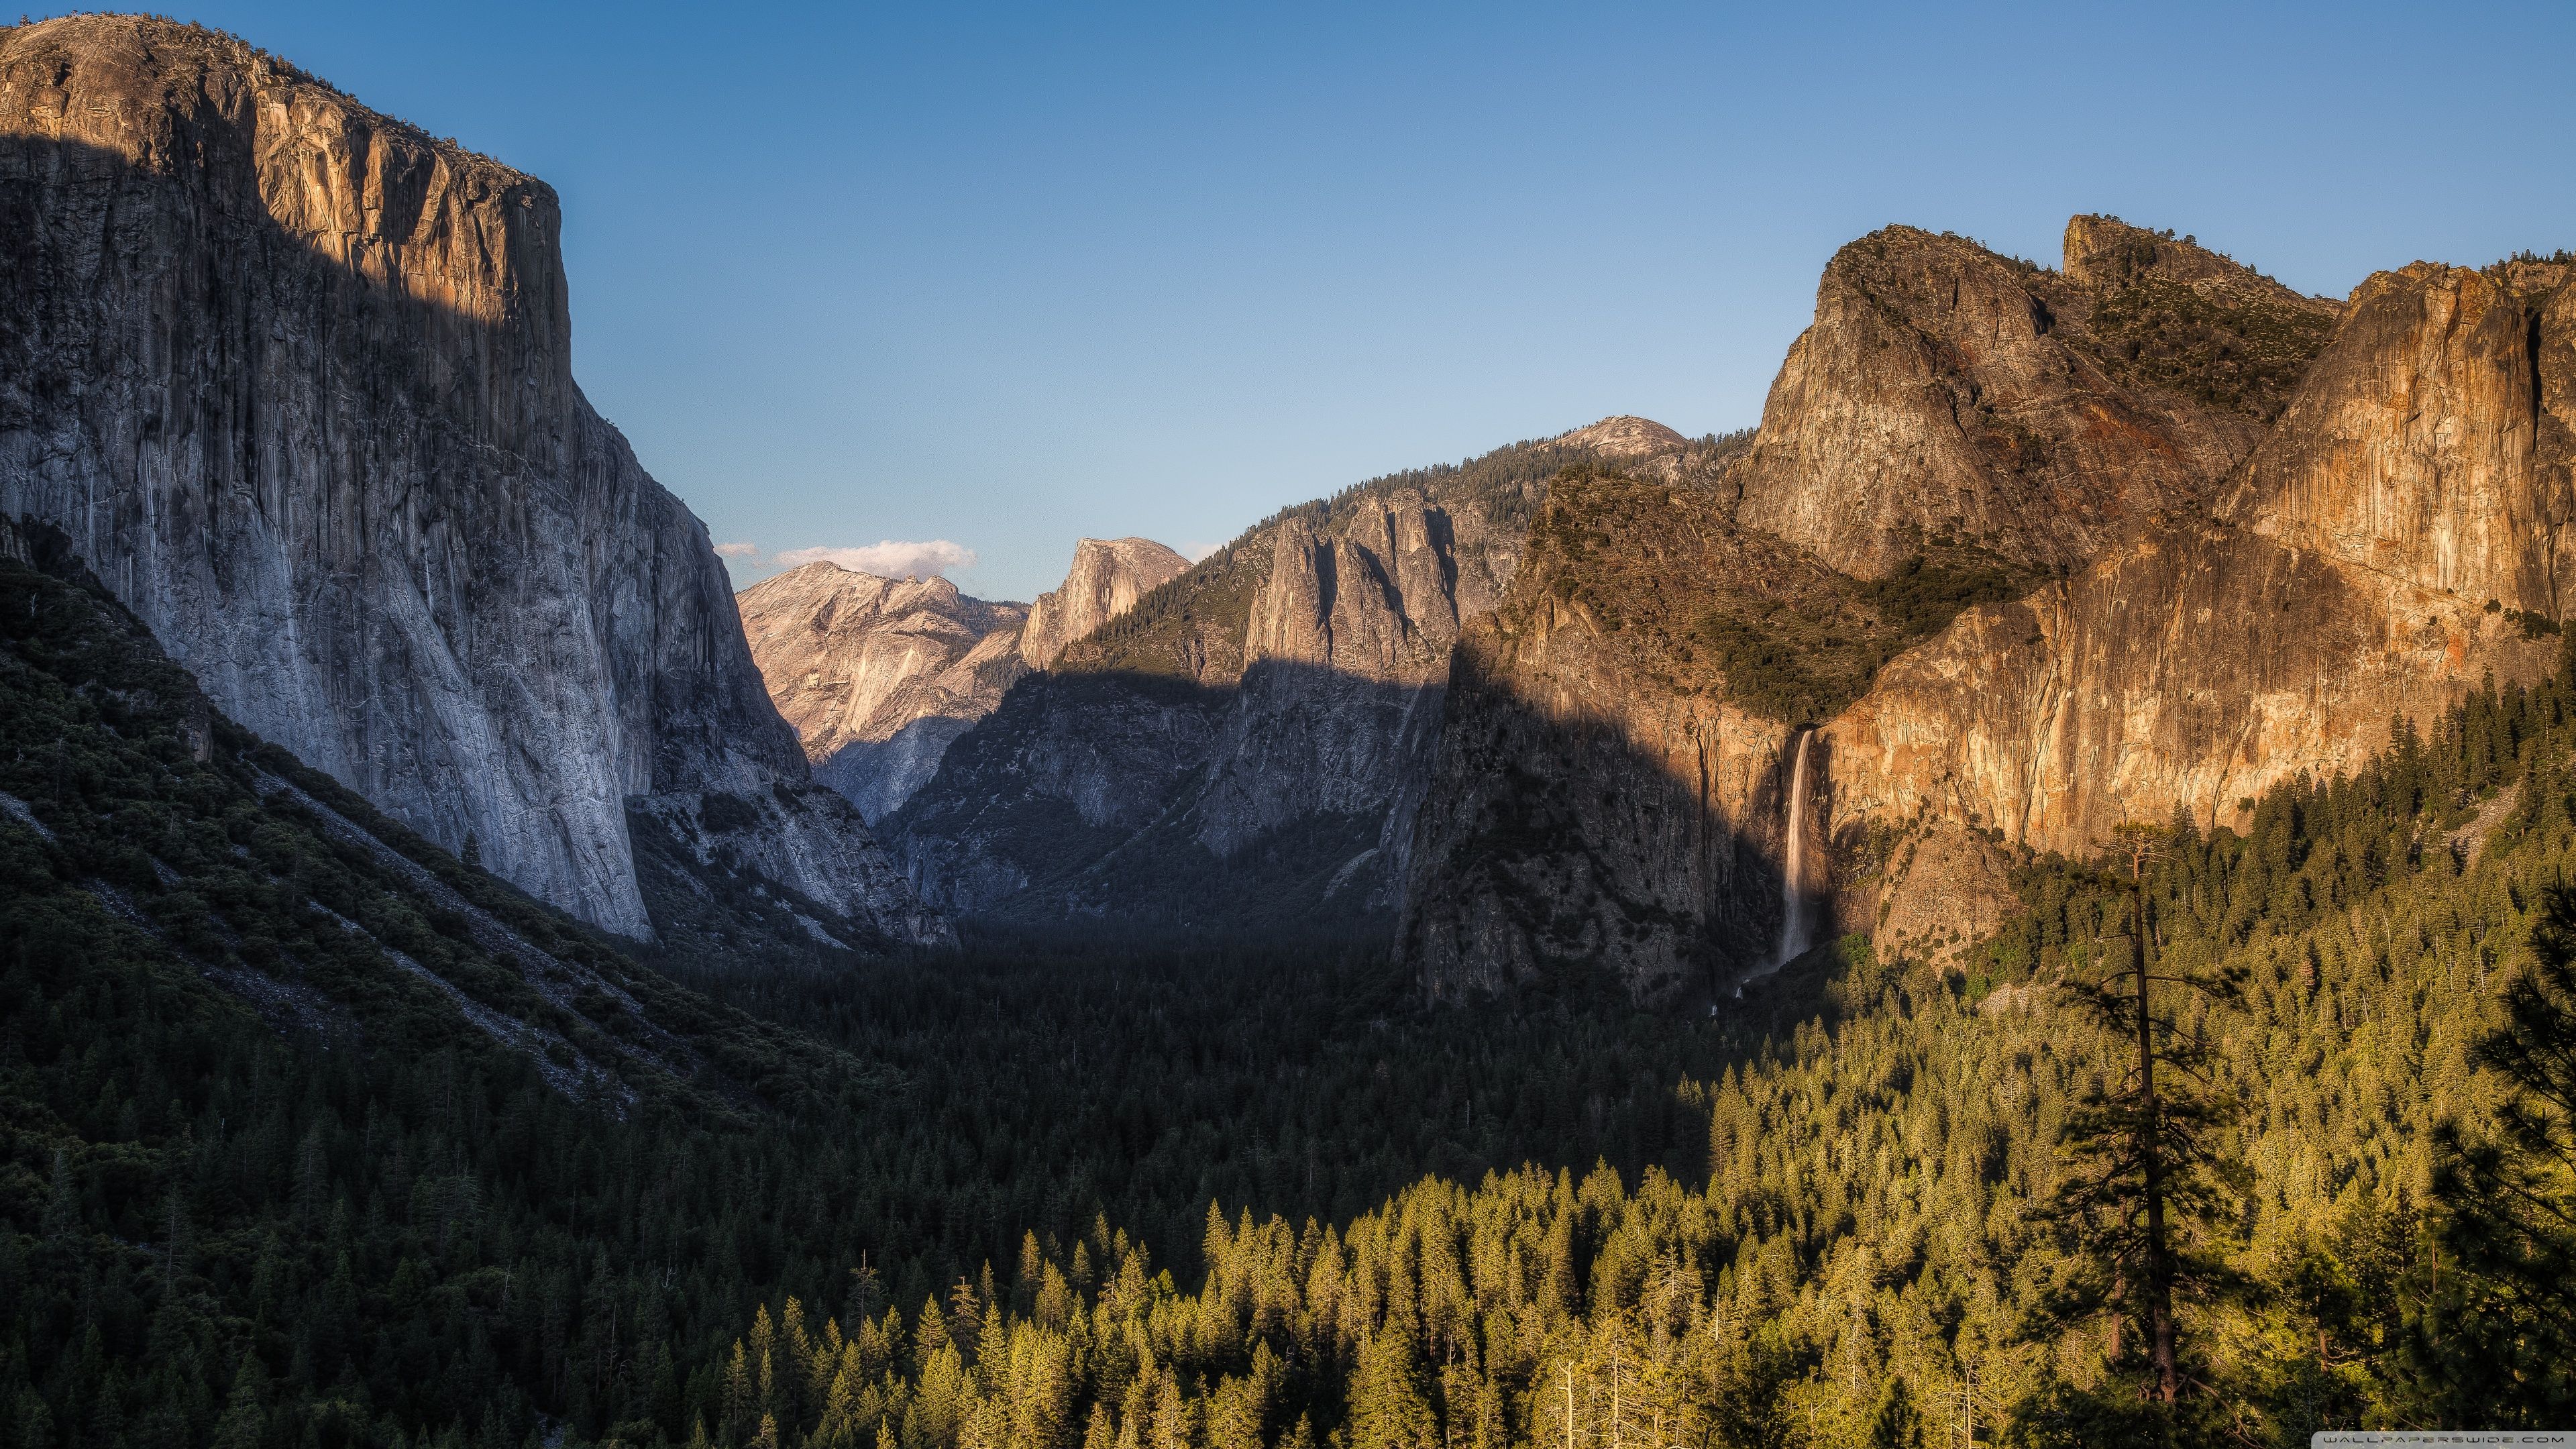 El Capitan, Half Dome, and Bridalveil Fall, from Tunnel View Ultra HD Desktop Background Wallpaper for 4K UHD TV, Widescreen & UltraWide Desktop & Laptop, Multi Display, Dual Monitor, Tablet